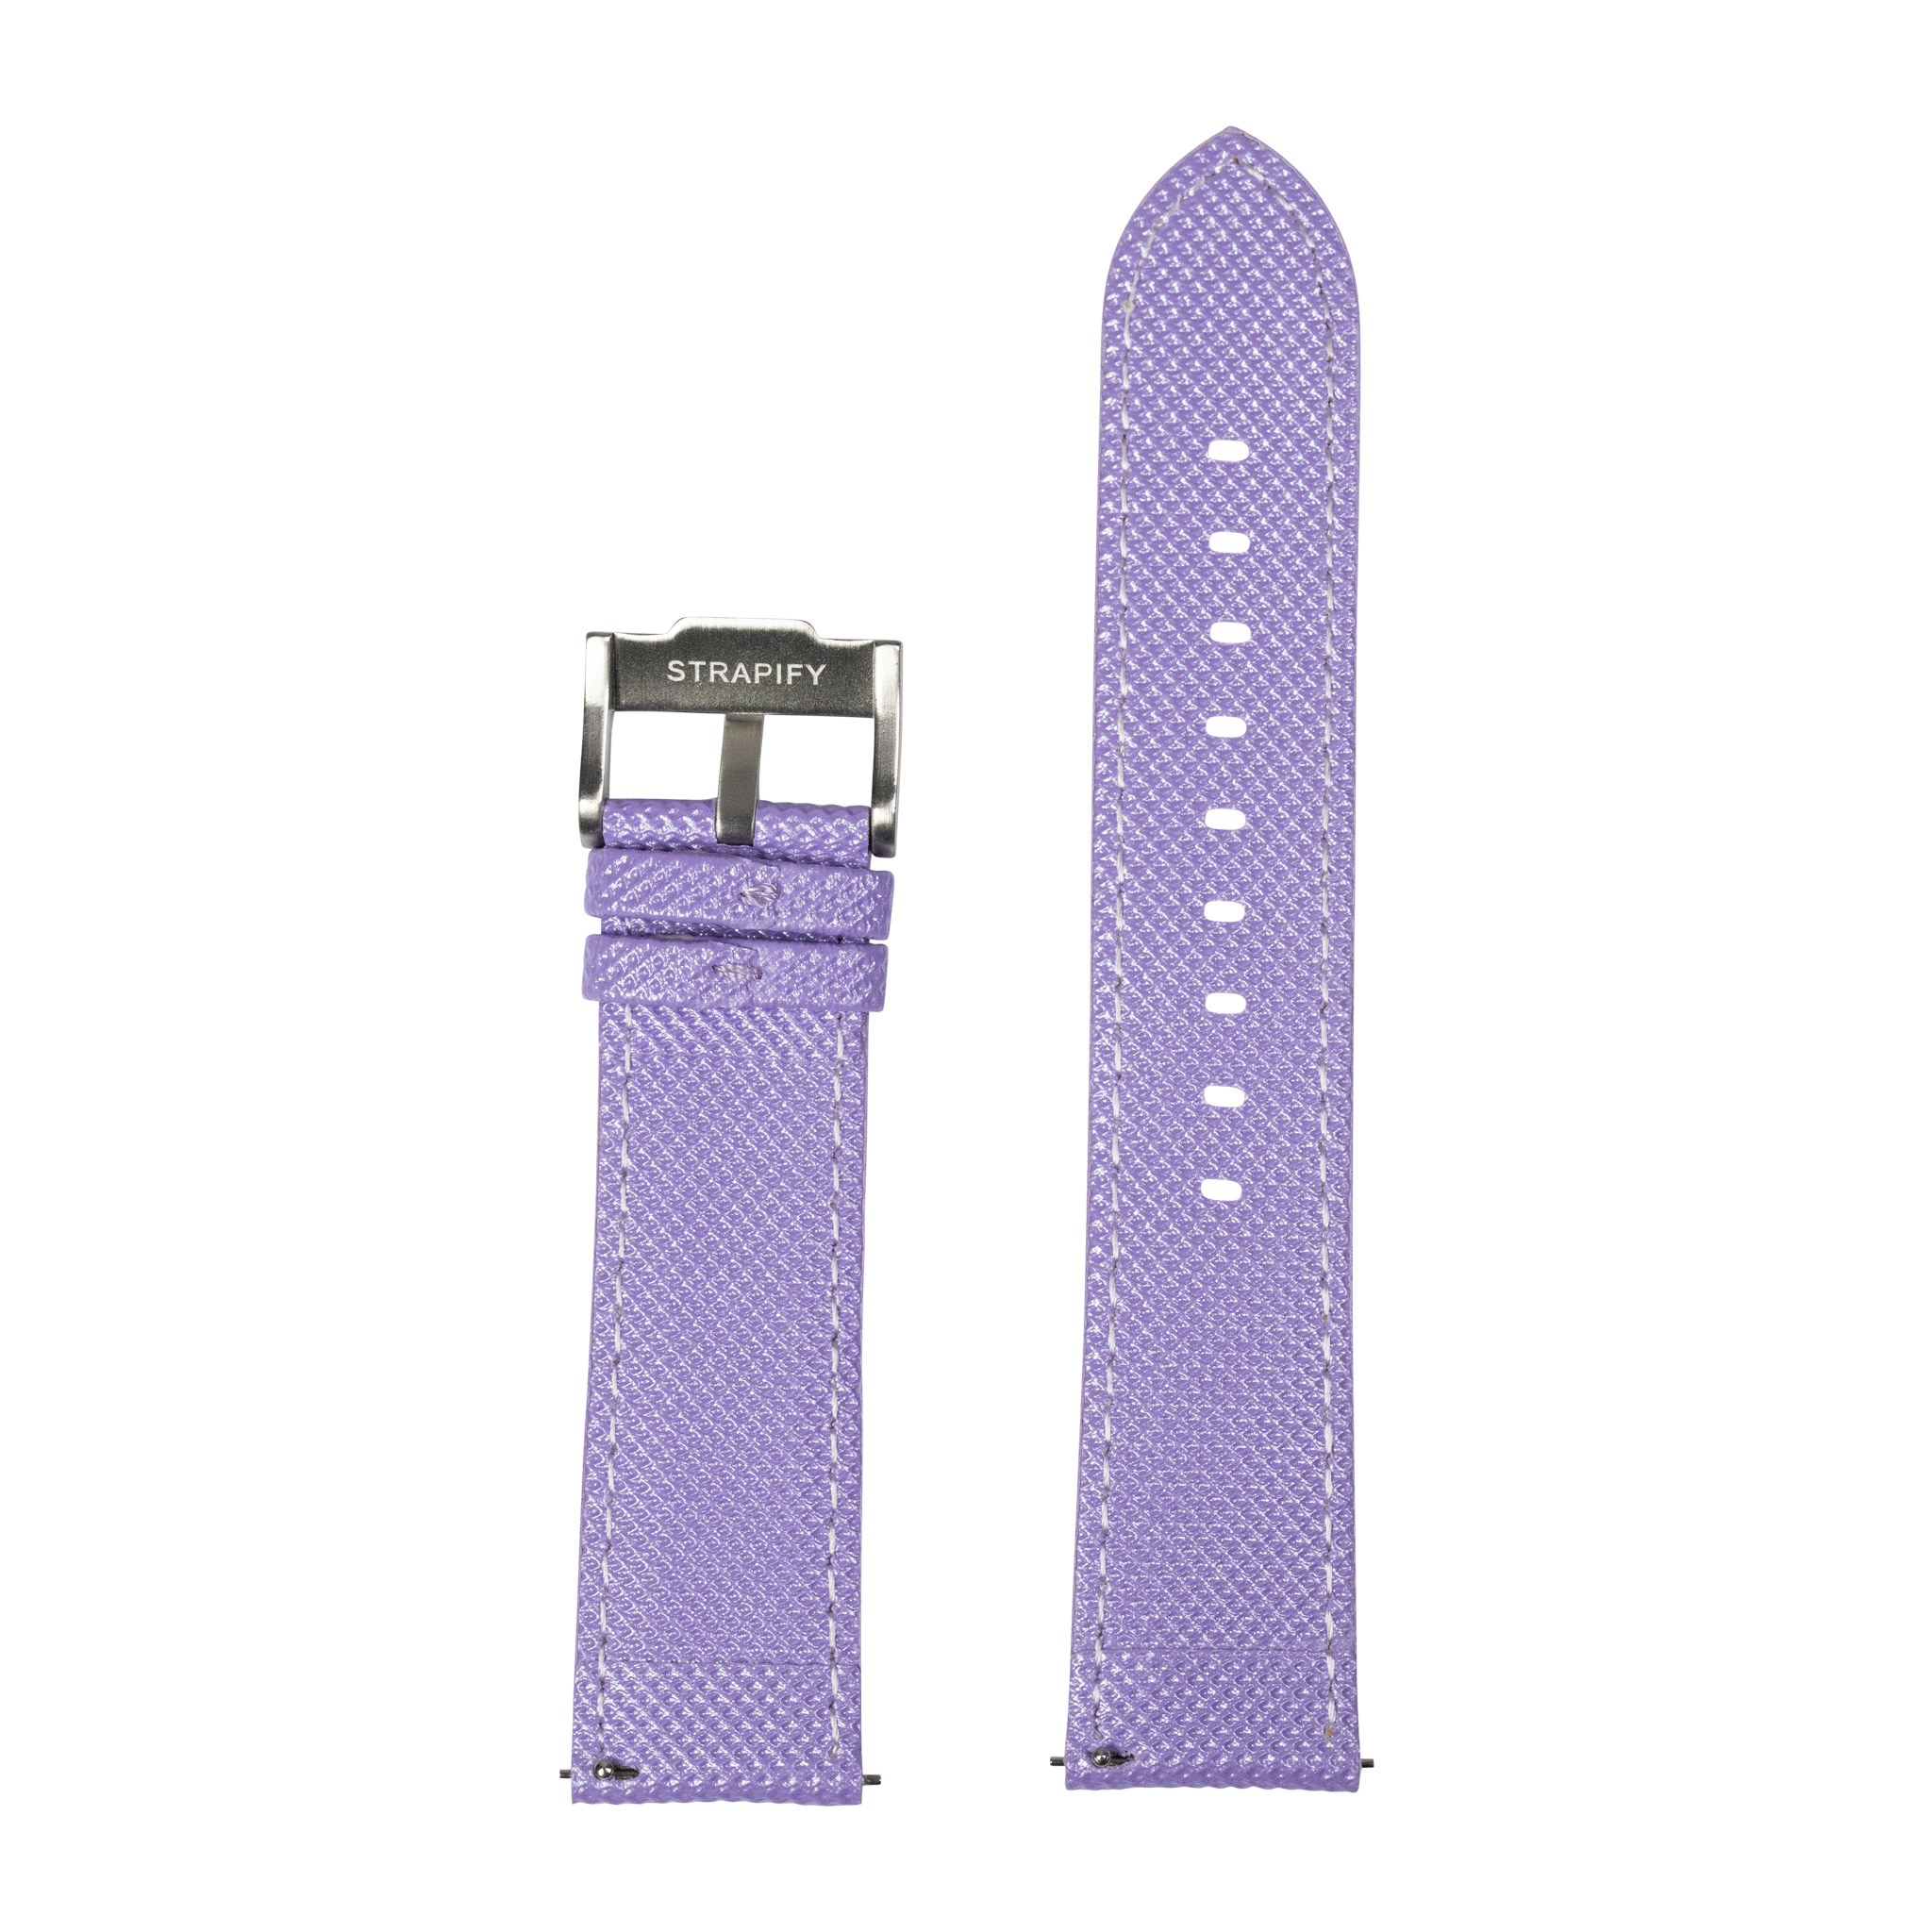 [Quick Release] Sailcloth - Lavender with White Stitching